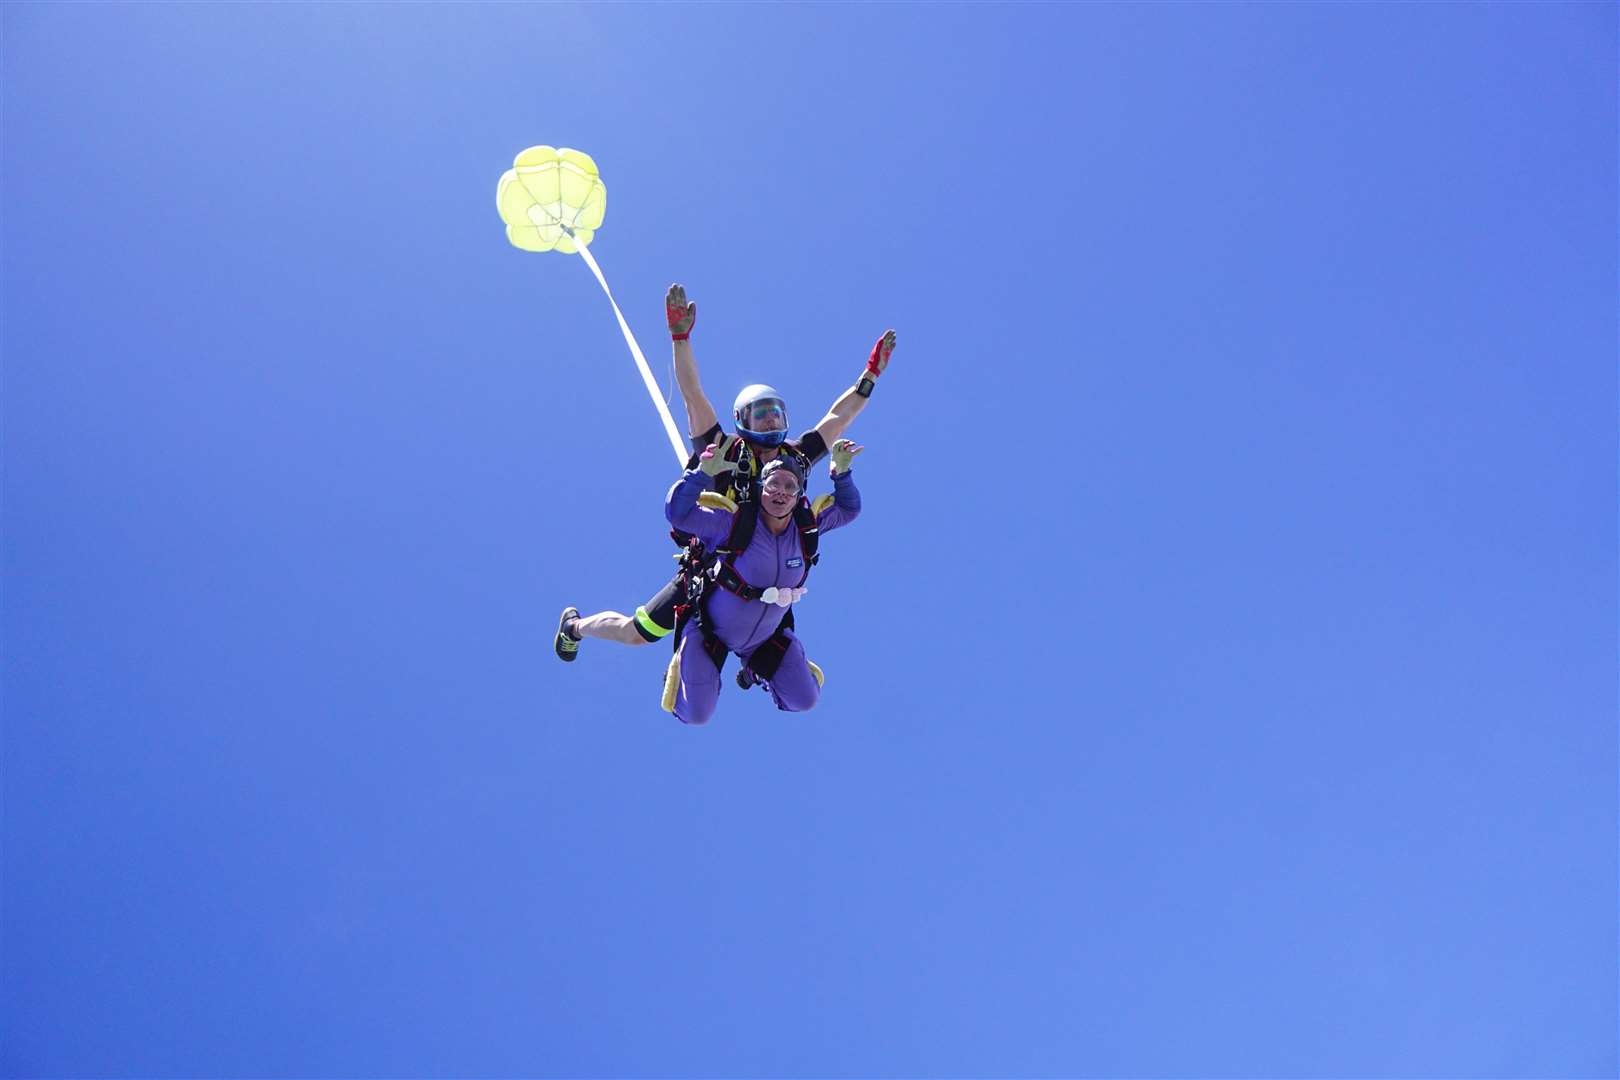 Vicky Smart on her charity skydive